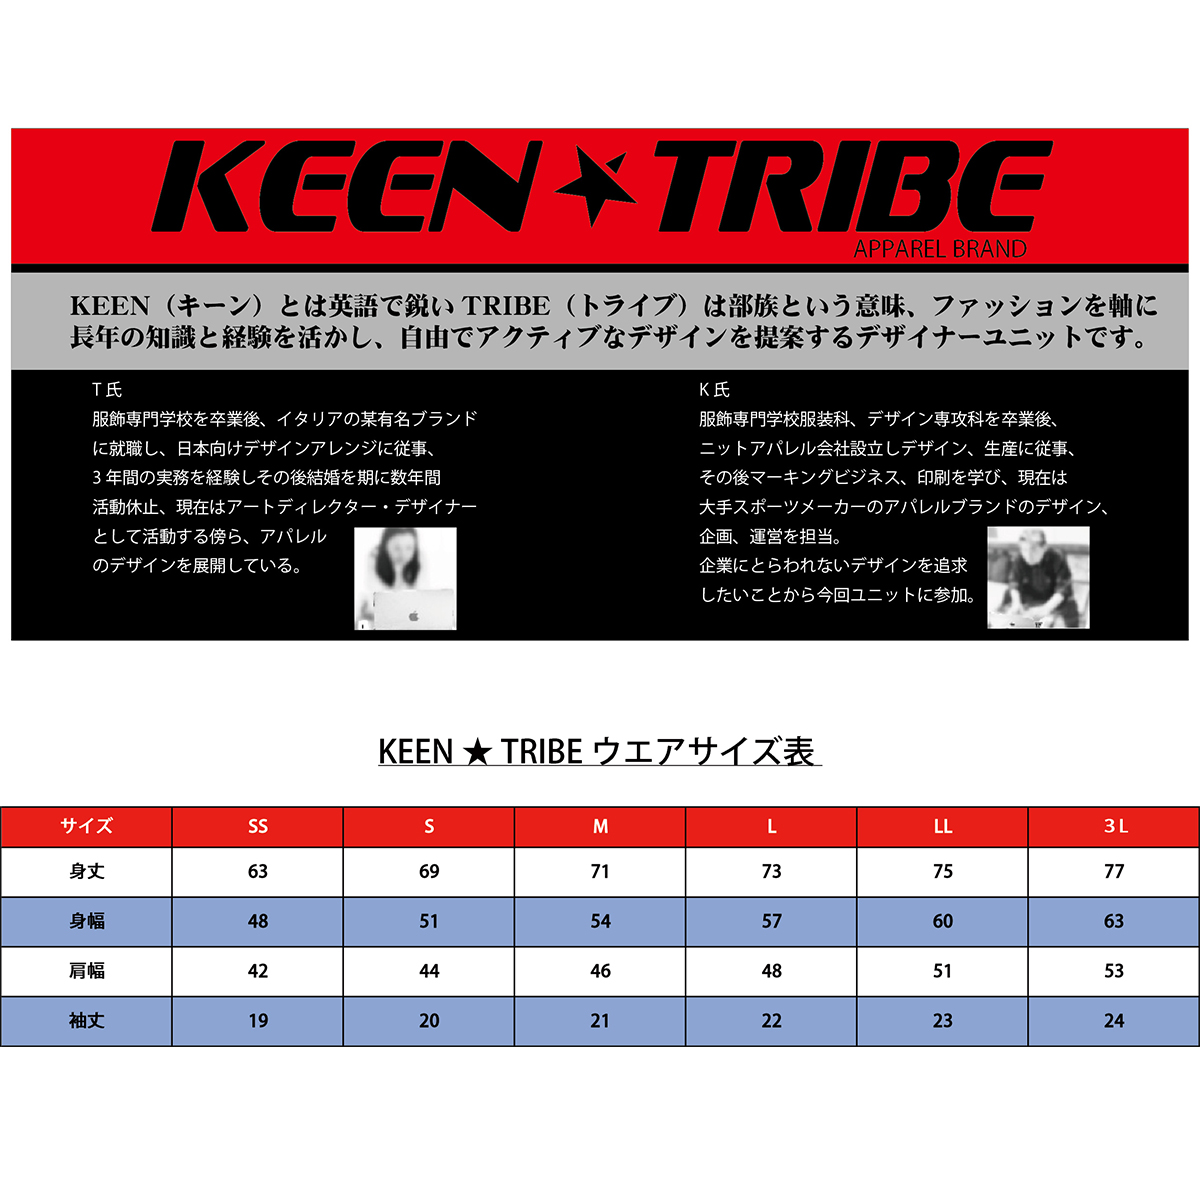 KEEN ★ TRIBE　KT-36(受注生産)